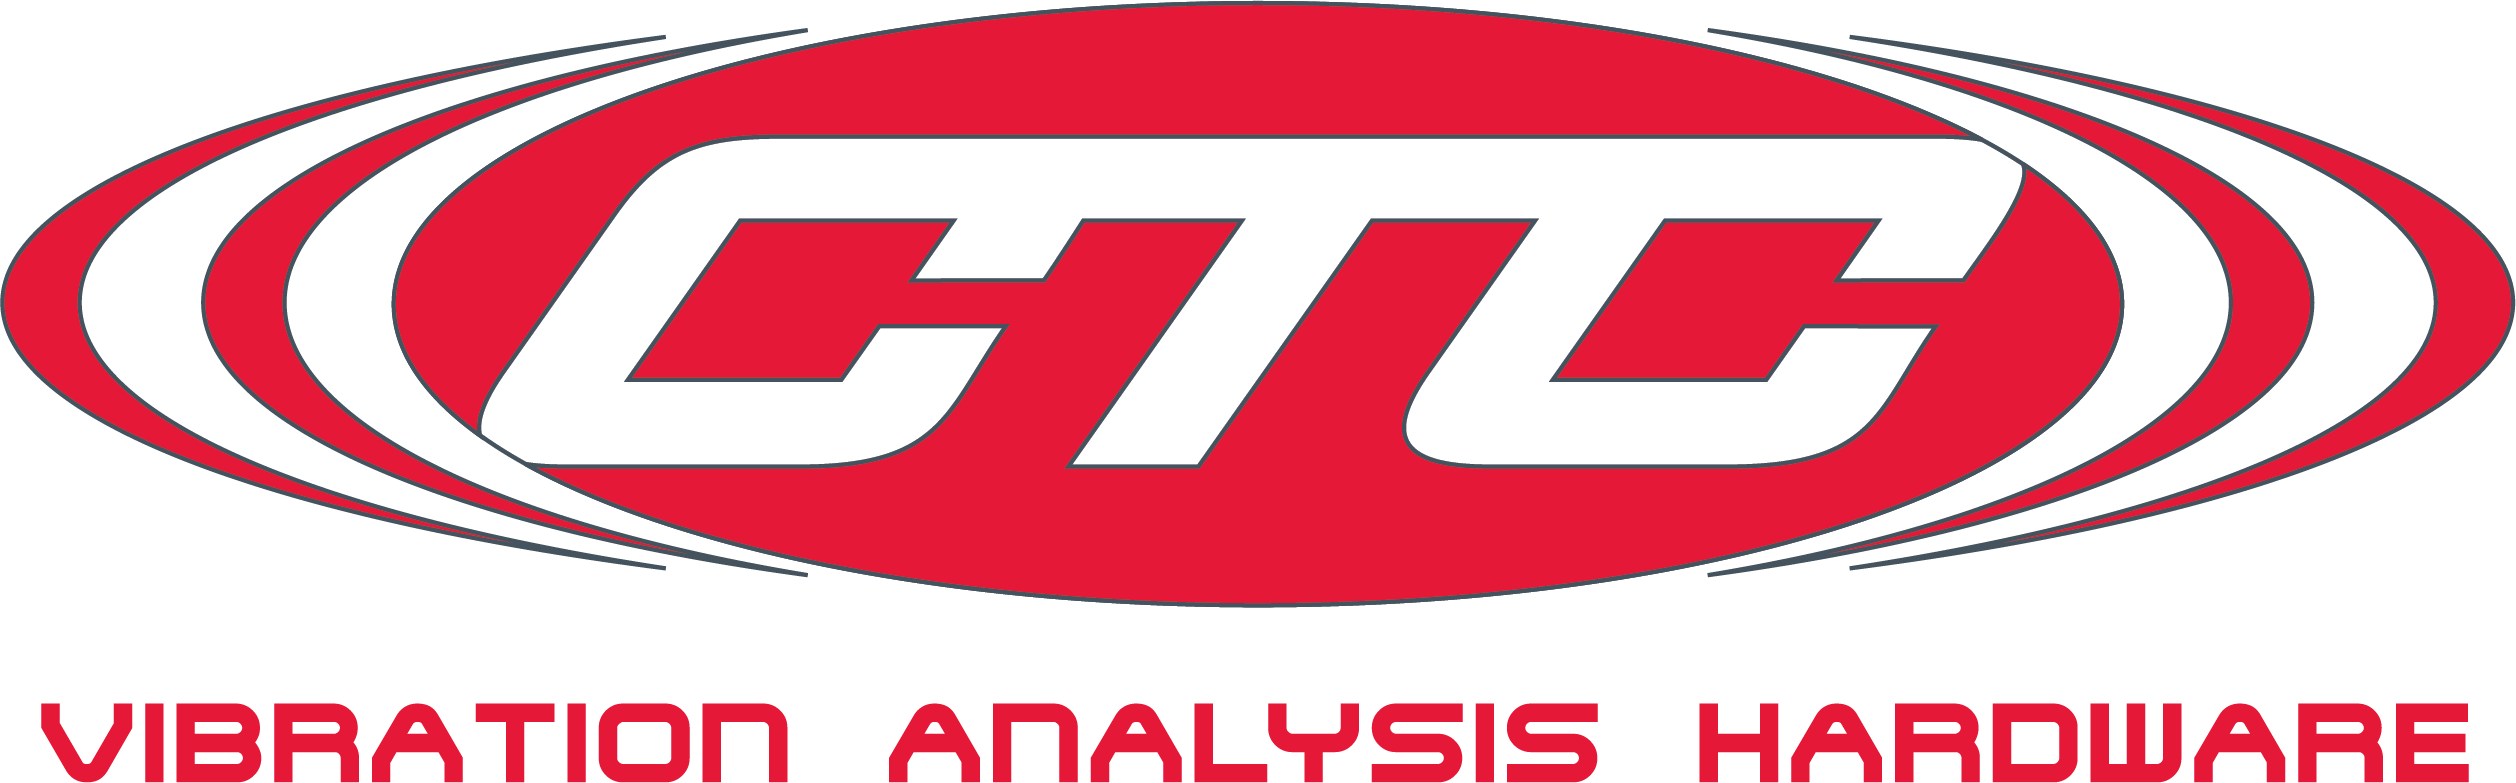 CTC product line logo with white text inside red oval and vibration analysis hardware tagline